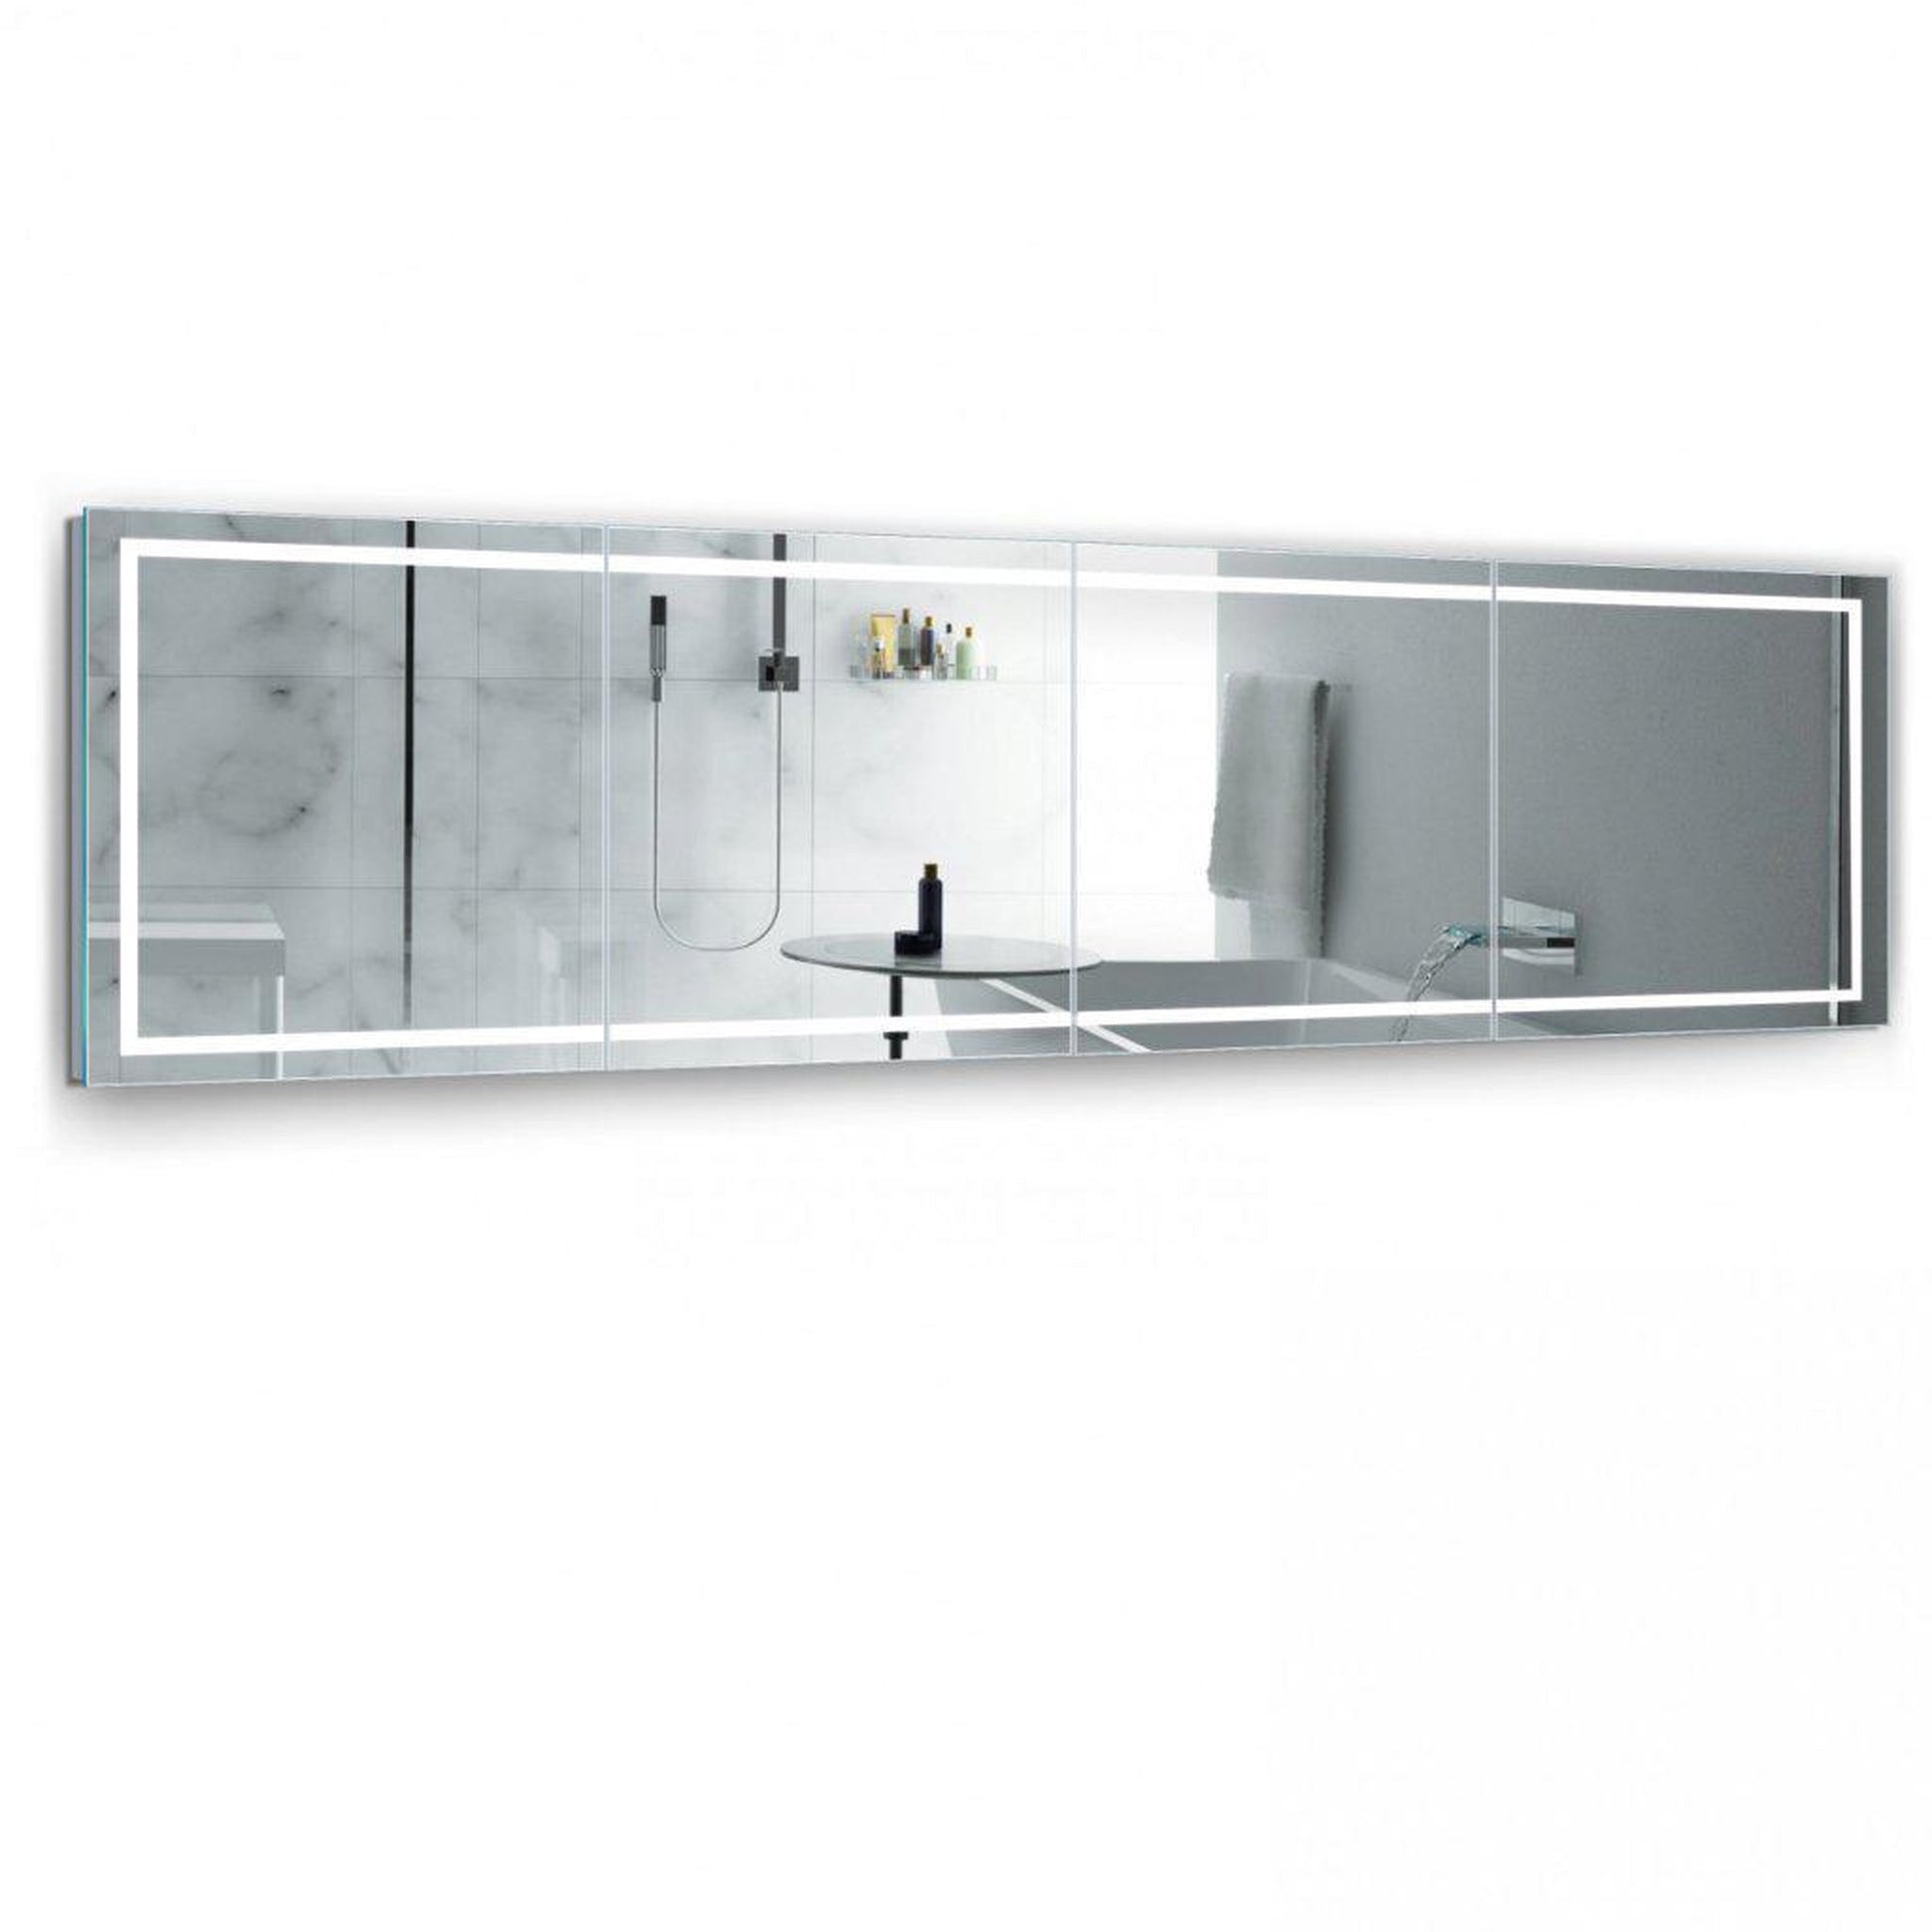 Krugg Reflections Mod 144" x 36" 5000K Long Modular Corner Wall-Mounted Silver-Backed LED Bathroom Vanity Mirror With Built-in Defogger and Dimmer